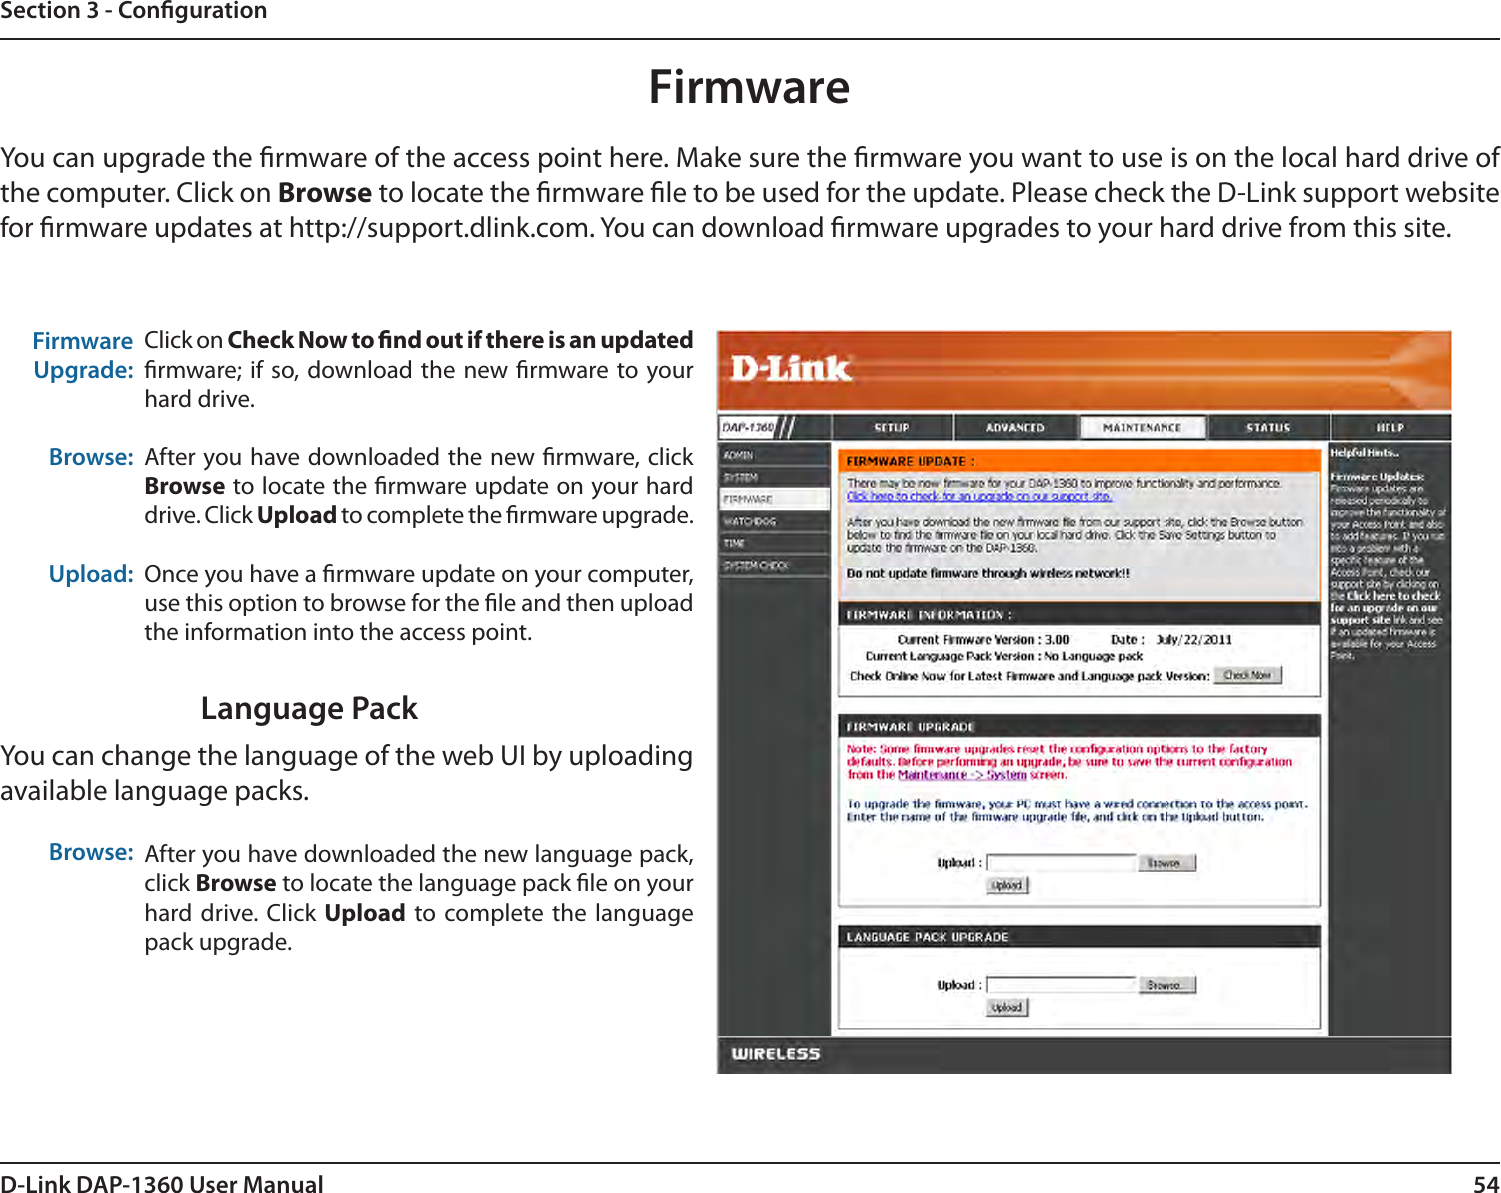 54D-Link DAP-1360 User ManualSection 3 - CongurationFirmwareUpgrade: Browse:Upload:Click on Check Now to nd out if there is an updated rmware; if so, download the new  rmware to your hard drive.After you have downloaded the new rmware, click Browse to locate the rmware update on your hard drive. Click Upload to complete the rmware upgrade.Once you have a rmware update on your computer, use this option to browse for the le and then upload the information into the access point. FirmwareYou can upgrade the rmware of the access point here. Make sure the rmware you want to use is on the local hard drive of the computer. Click on Browse to locate the rmware le to be used for the update. Please check the D-Link support website for rmware updates at http://support.dlink.com. You can download rmware upgrades to your hard drive from this site.After you have downloaded the new language pack, click Browse to locate the language pack le on your hard drive. Click  Upload to complete the language pack upgrade.Language PackYou can change the language of the web UI by uploading available language packs.Browse: